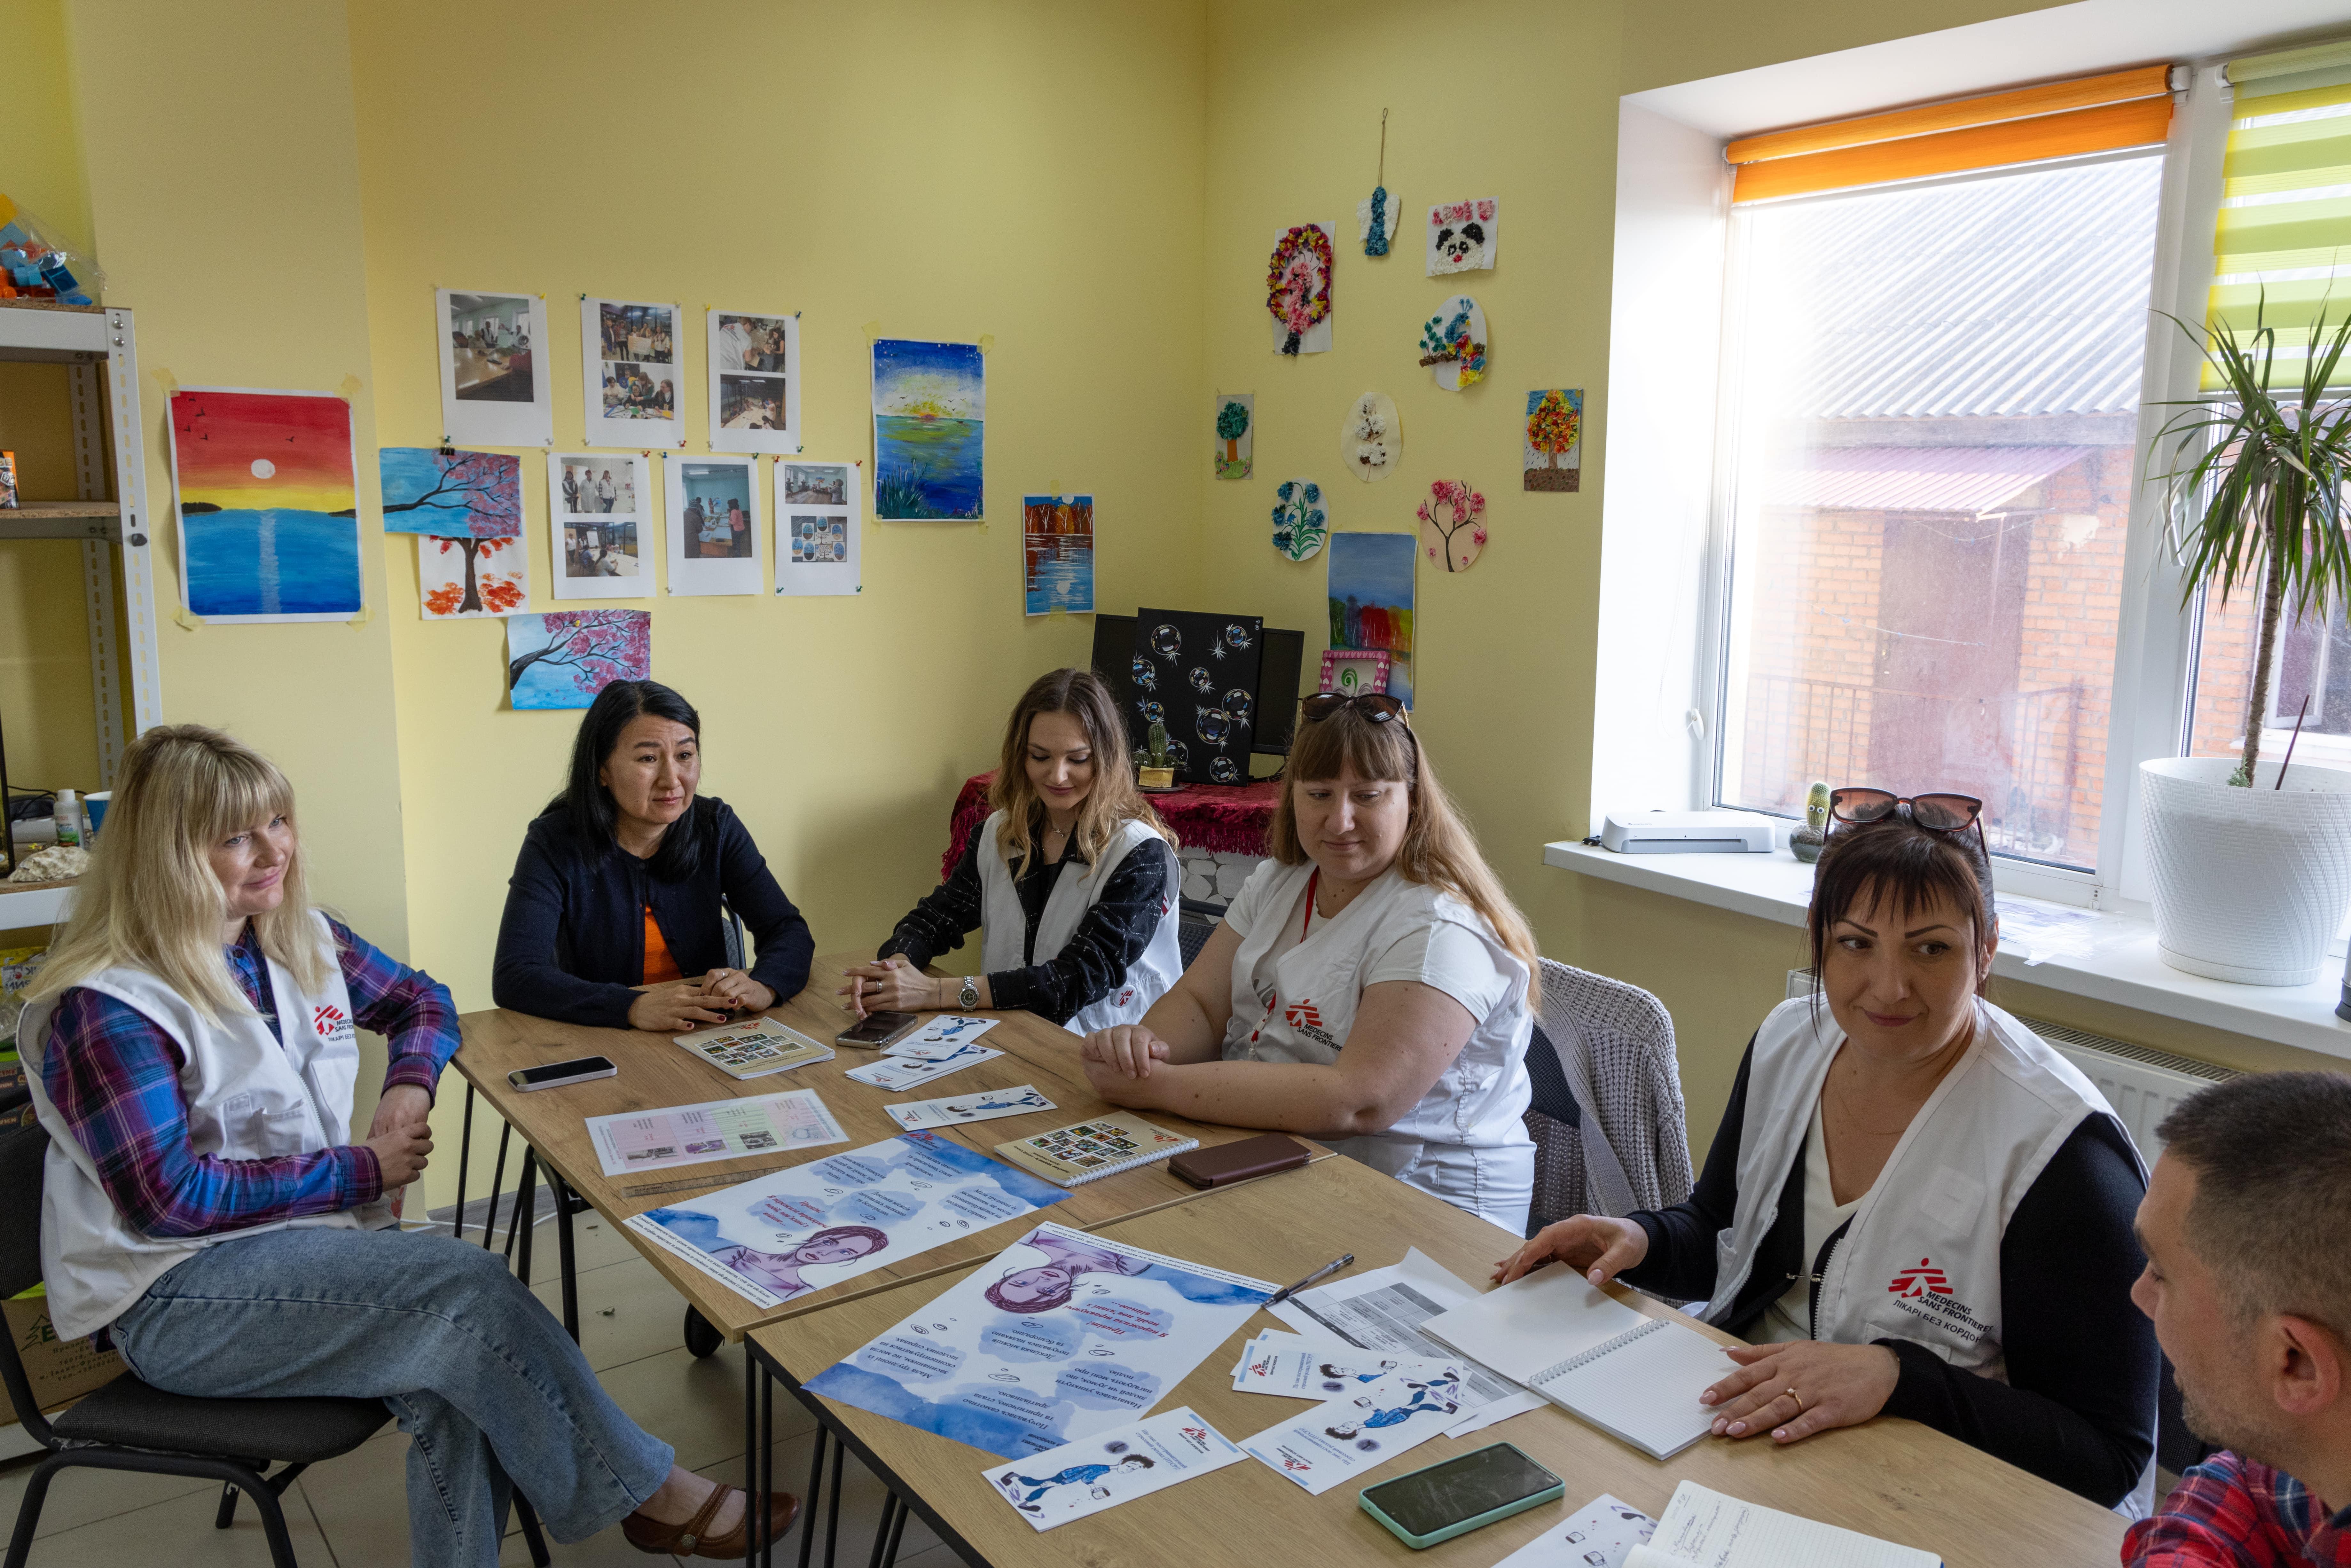 Psychological Support in Ukraine: Morning meeting of the MSF health promoters team in the trauma centre in Vinnytsia, Ukraine.